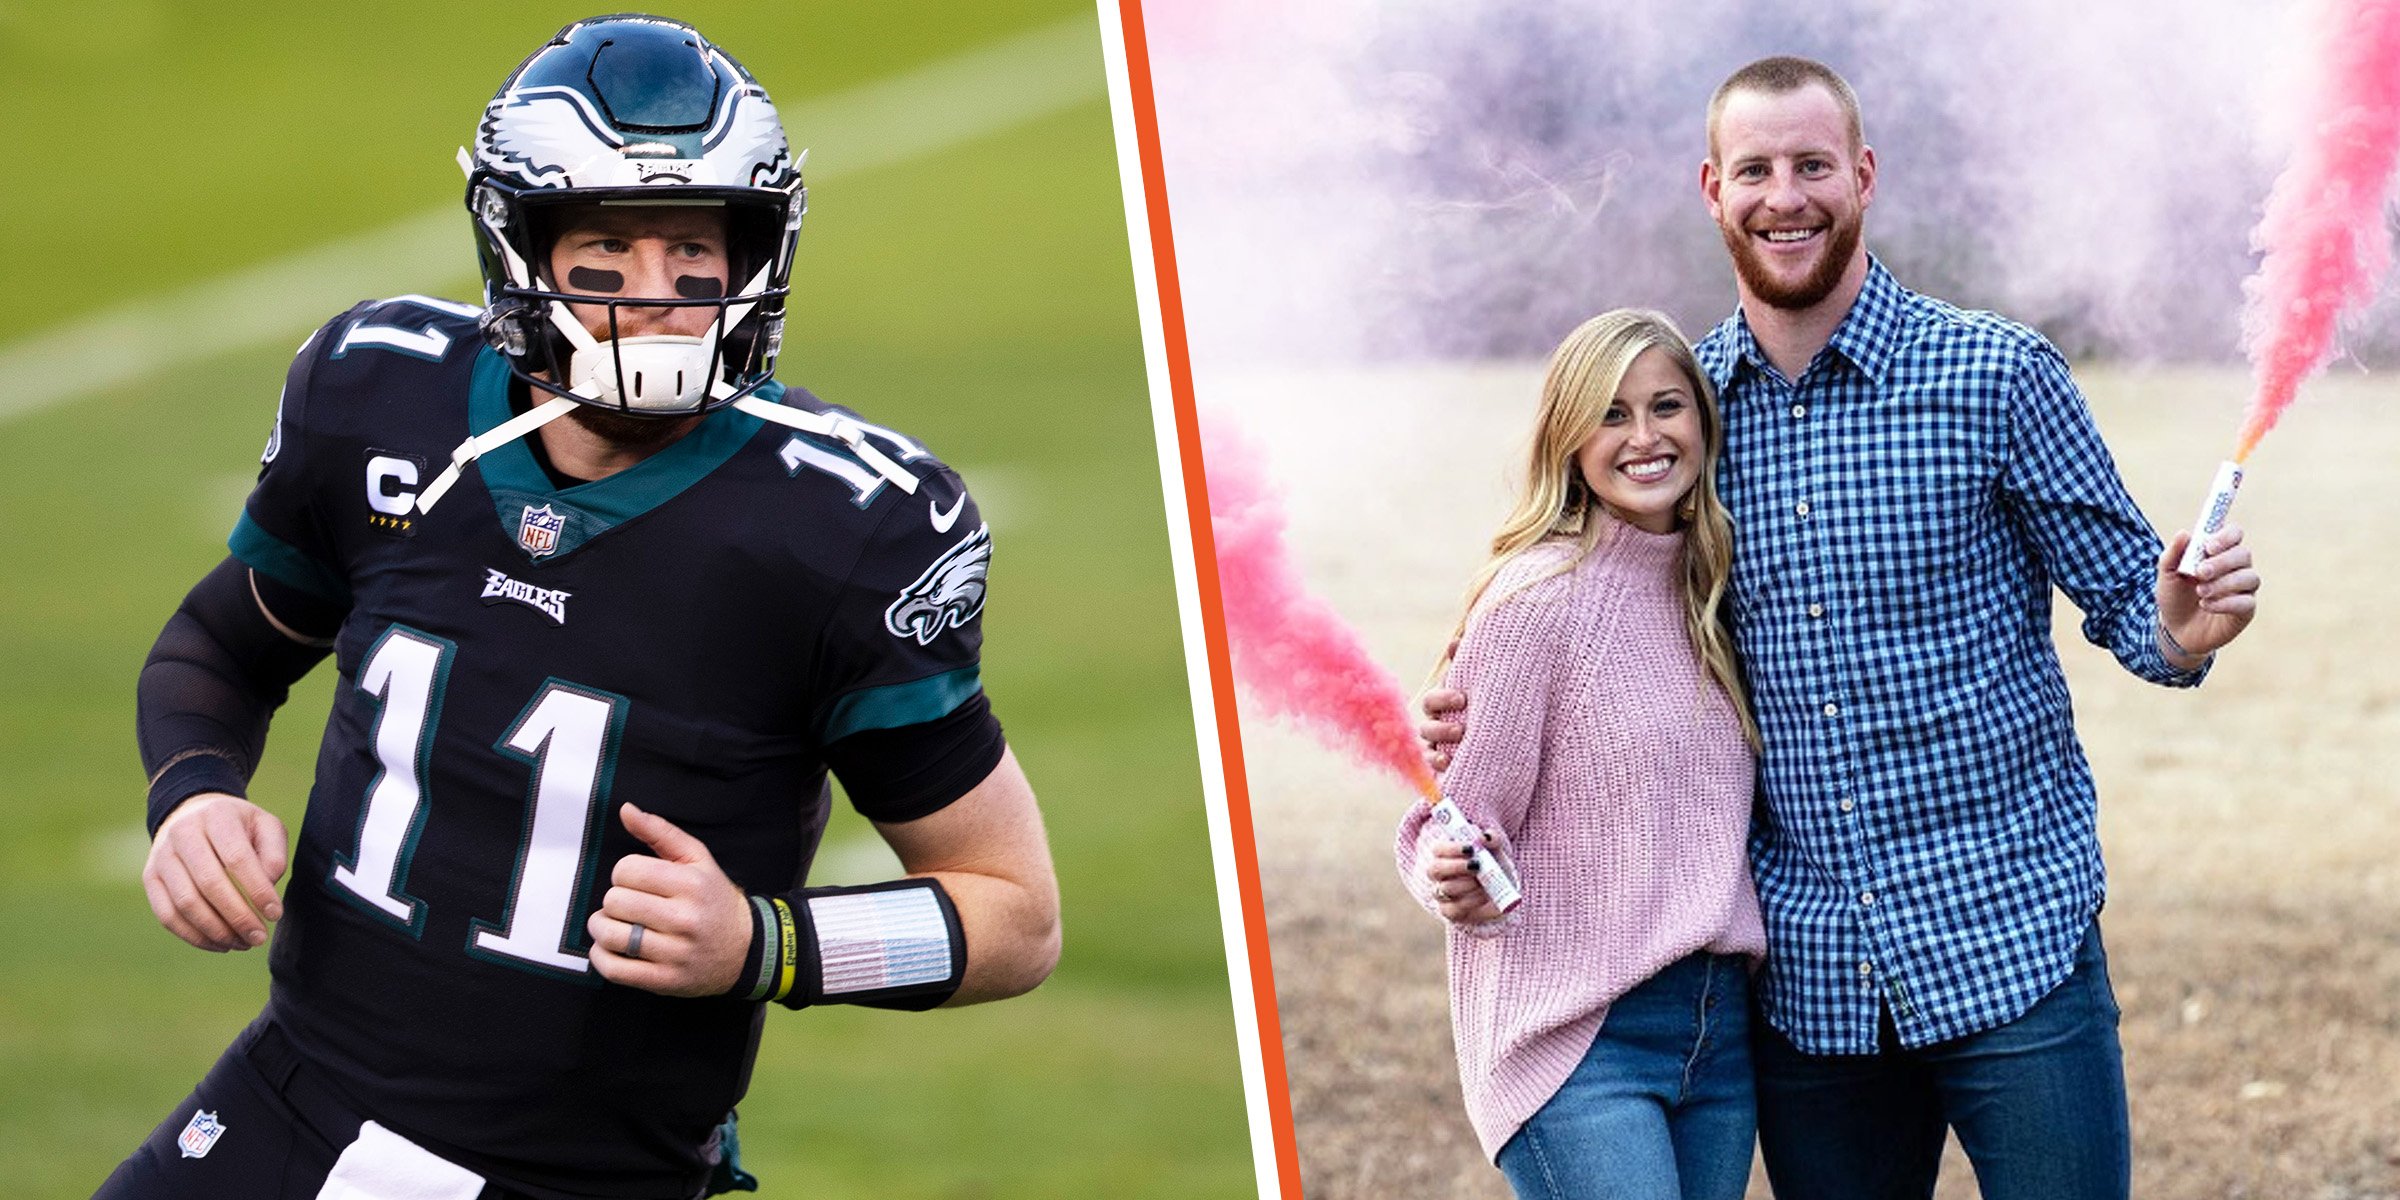 Carson Wents Is Pictured during a Game | Madison Oberg Poses for a Picture with Carson Wentz | Source: Getty Images | Instagram/cj_wentz11